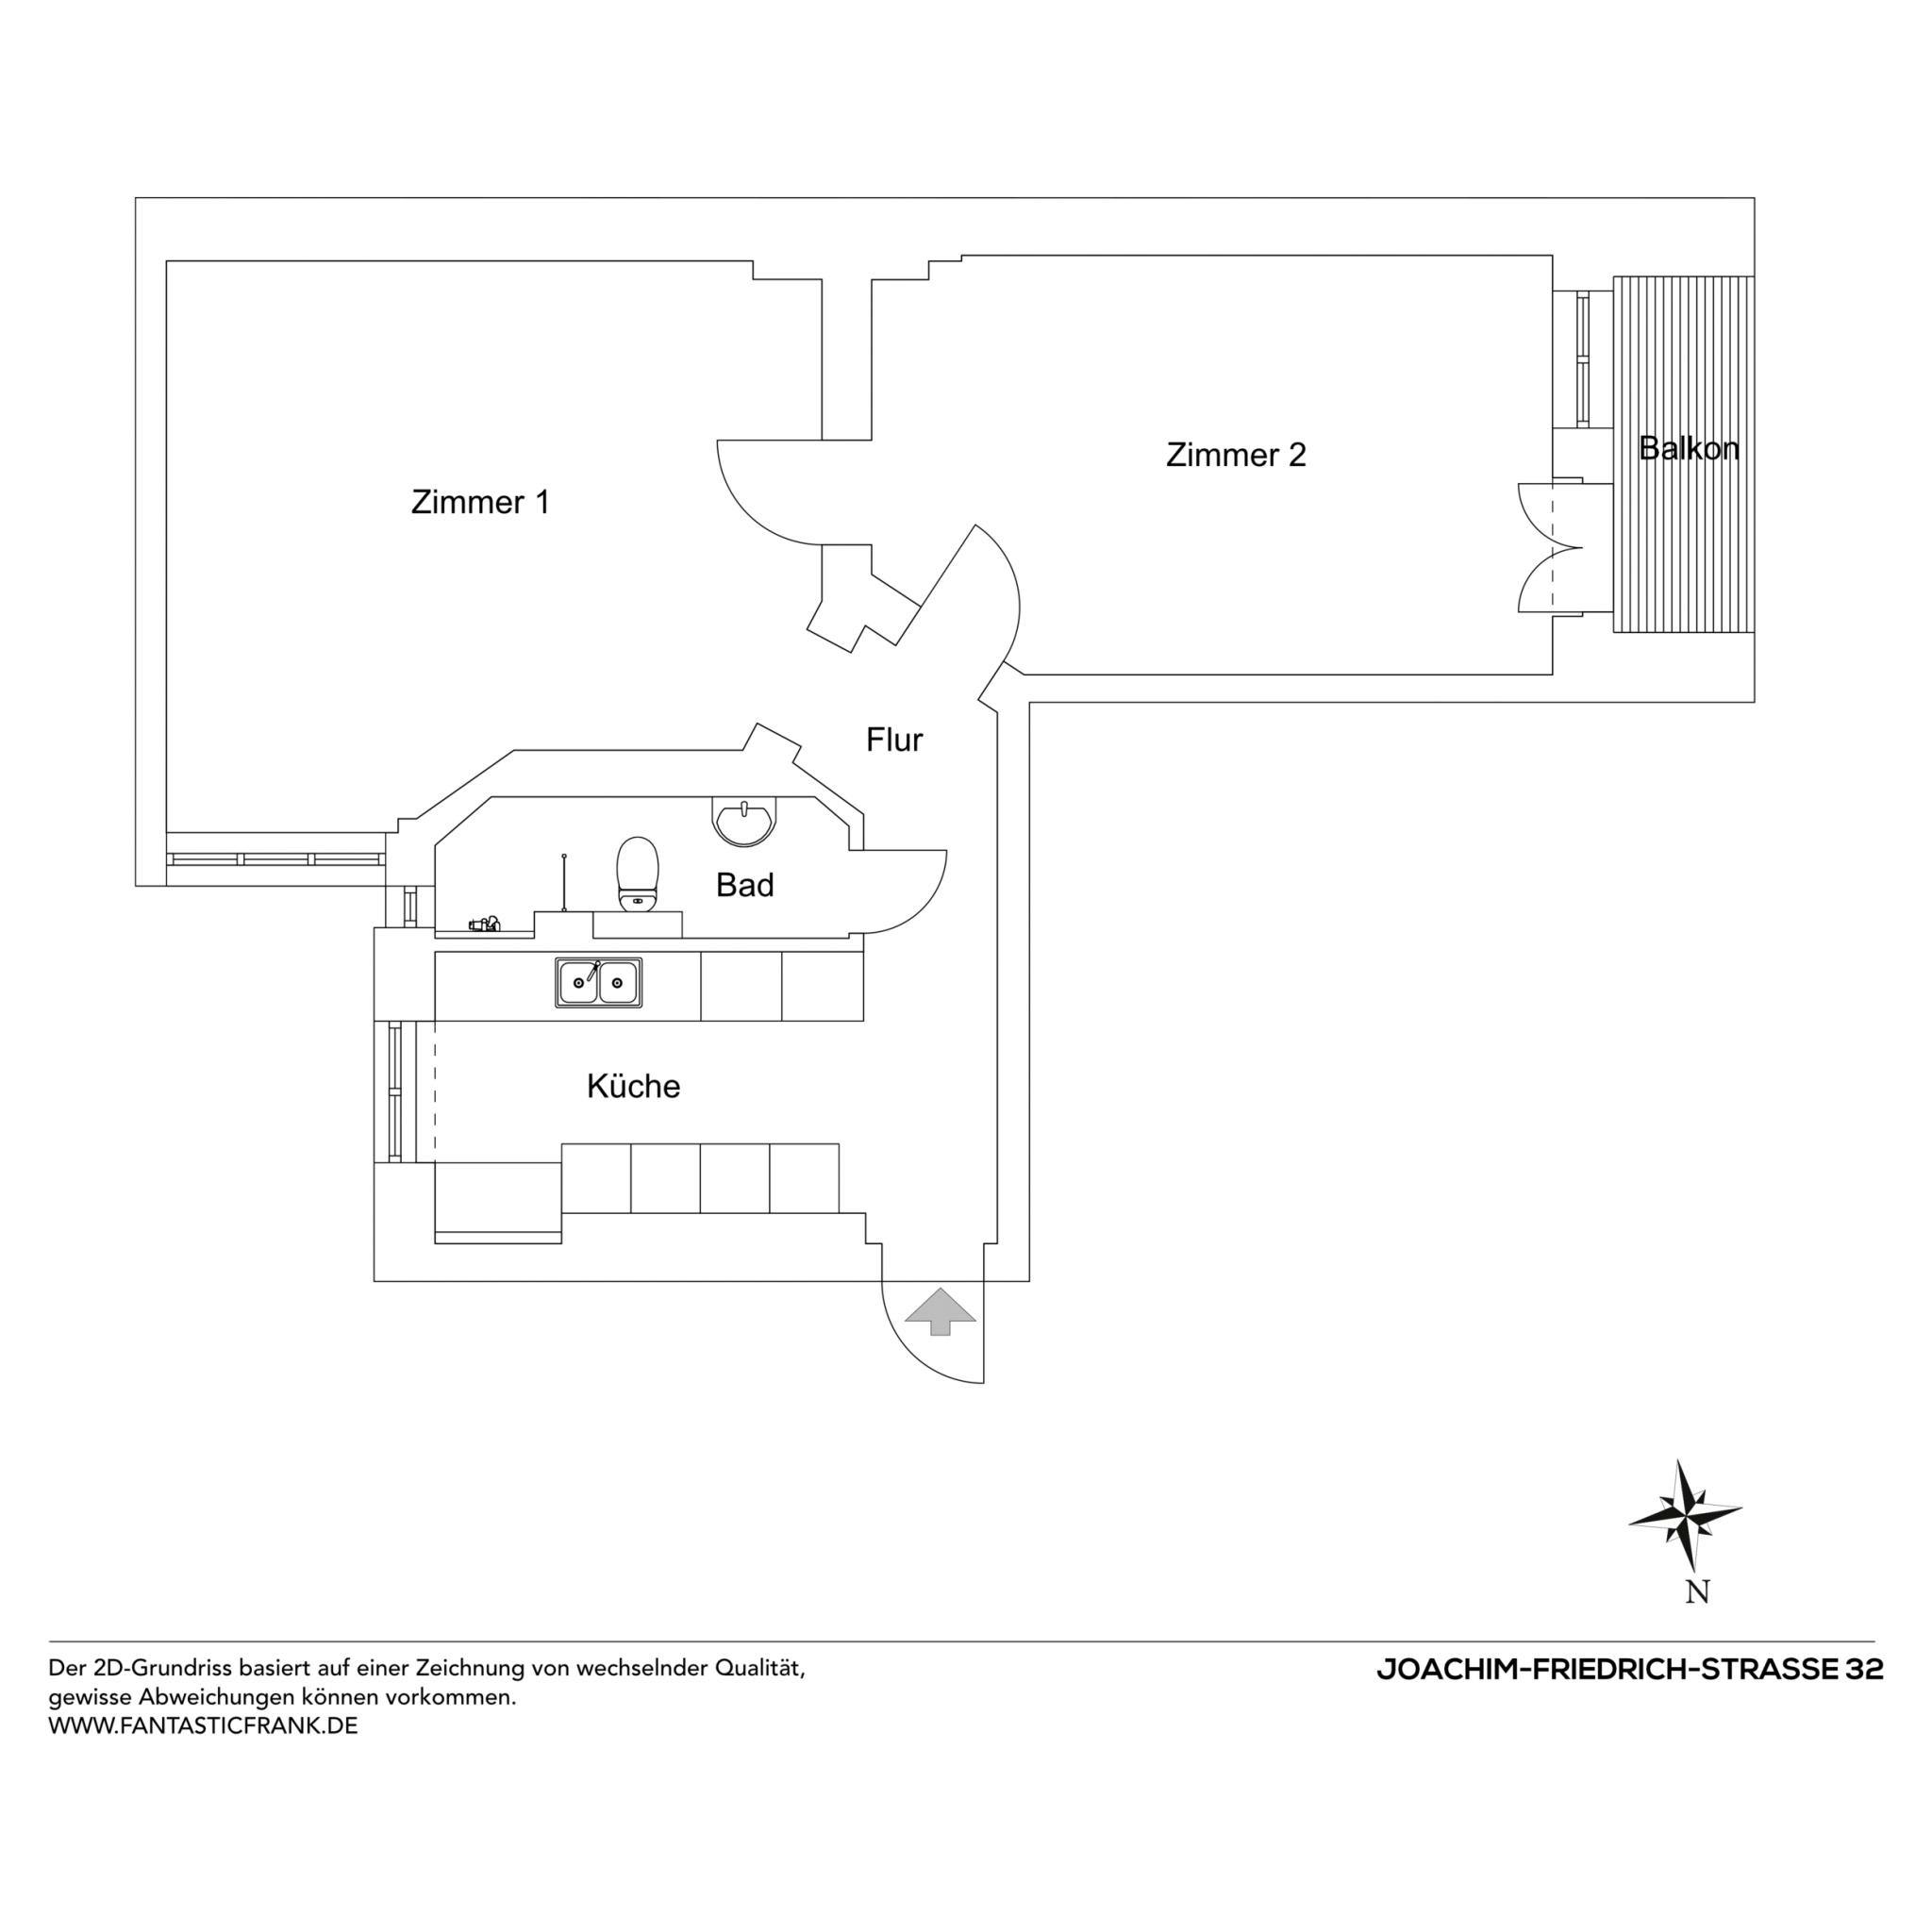 The image features a floor plan of a house with a large living room, a kitchen, and a bathroom. The floor plan is divided into sections, including the living room, kitchen, and bathroom, and includes a diagram of the layout.